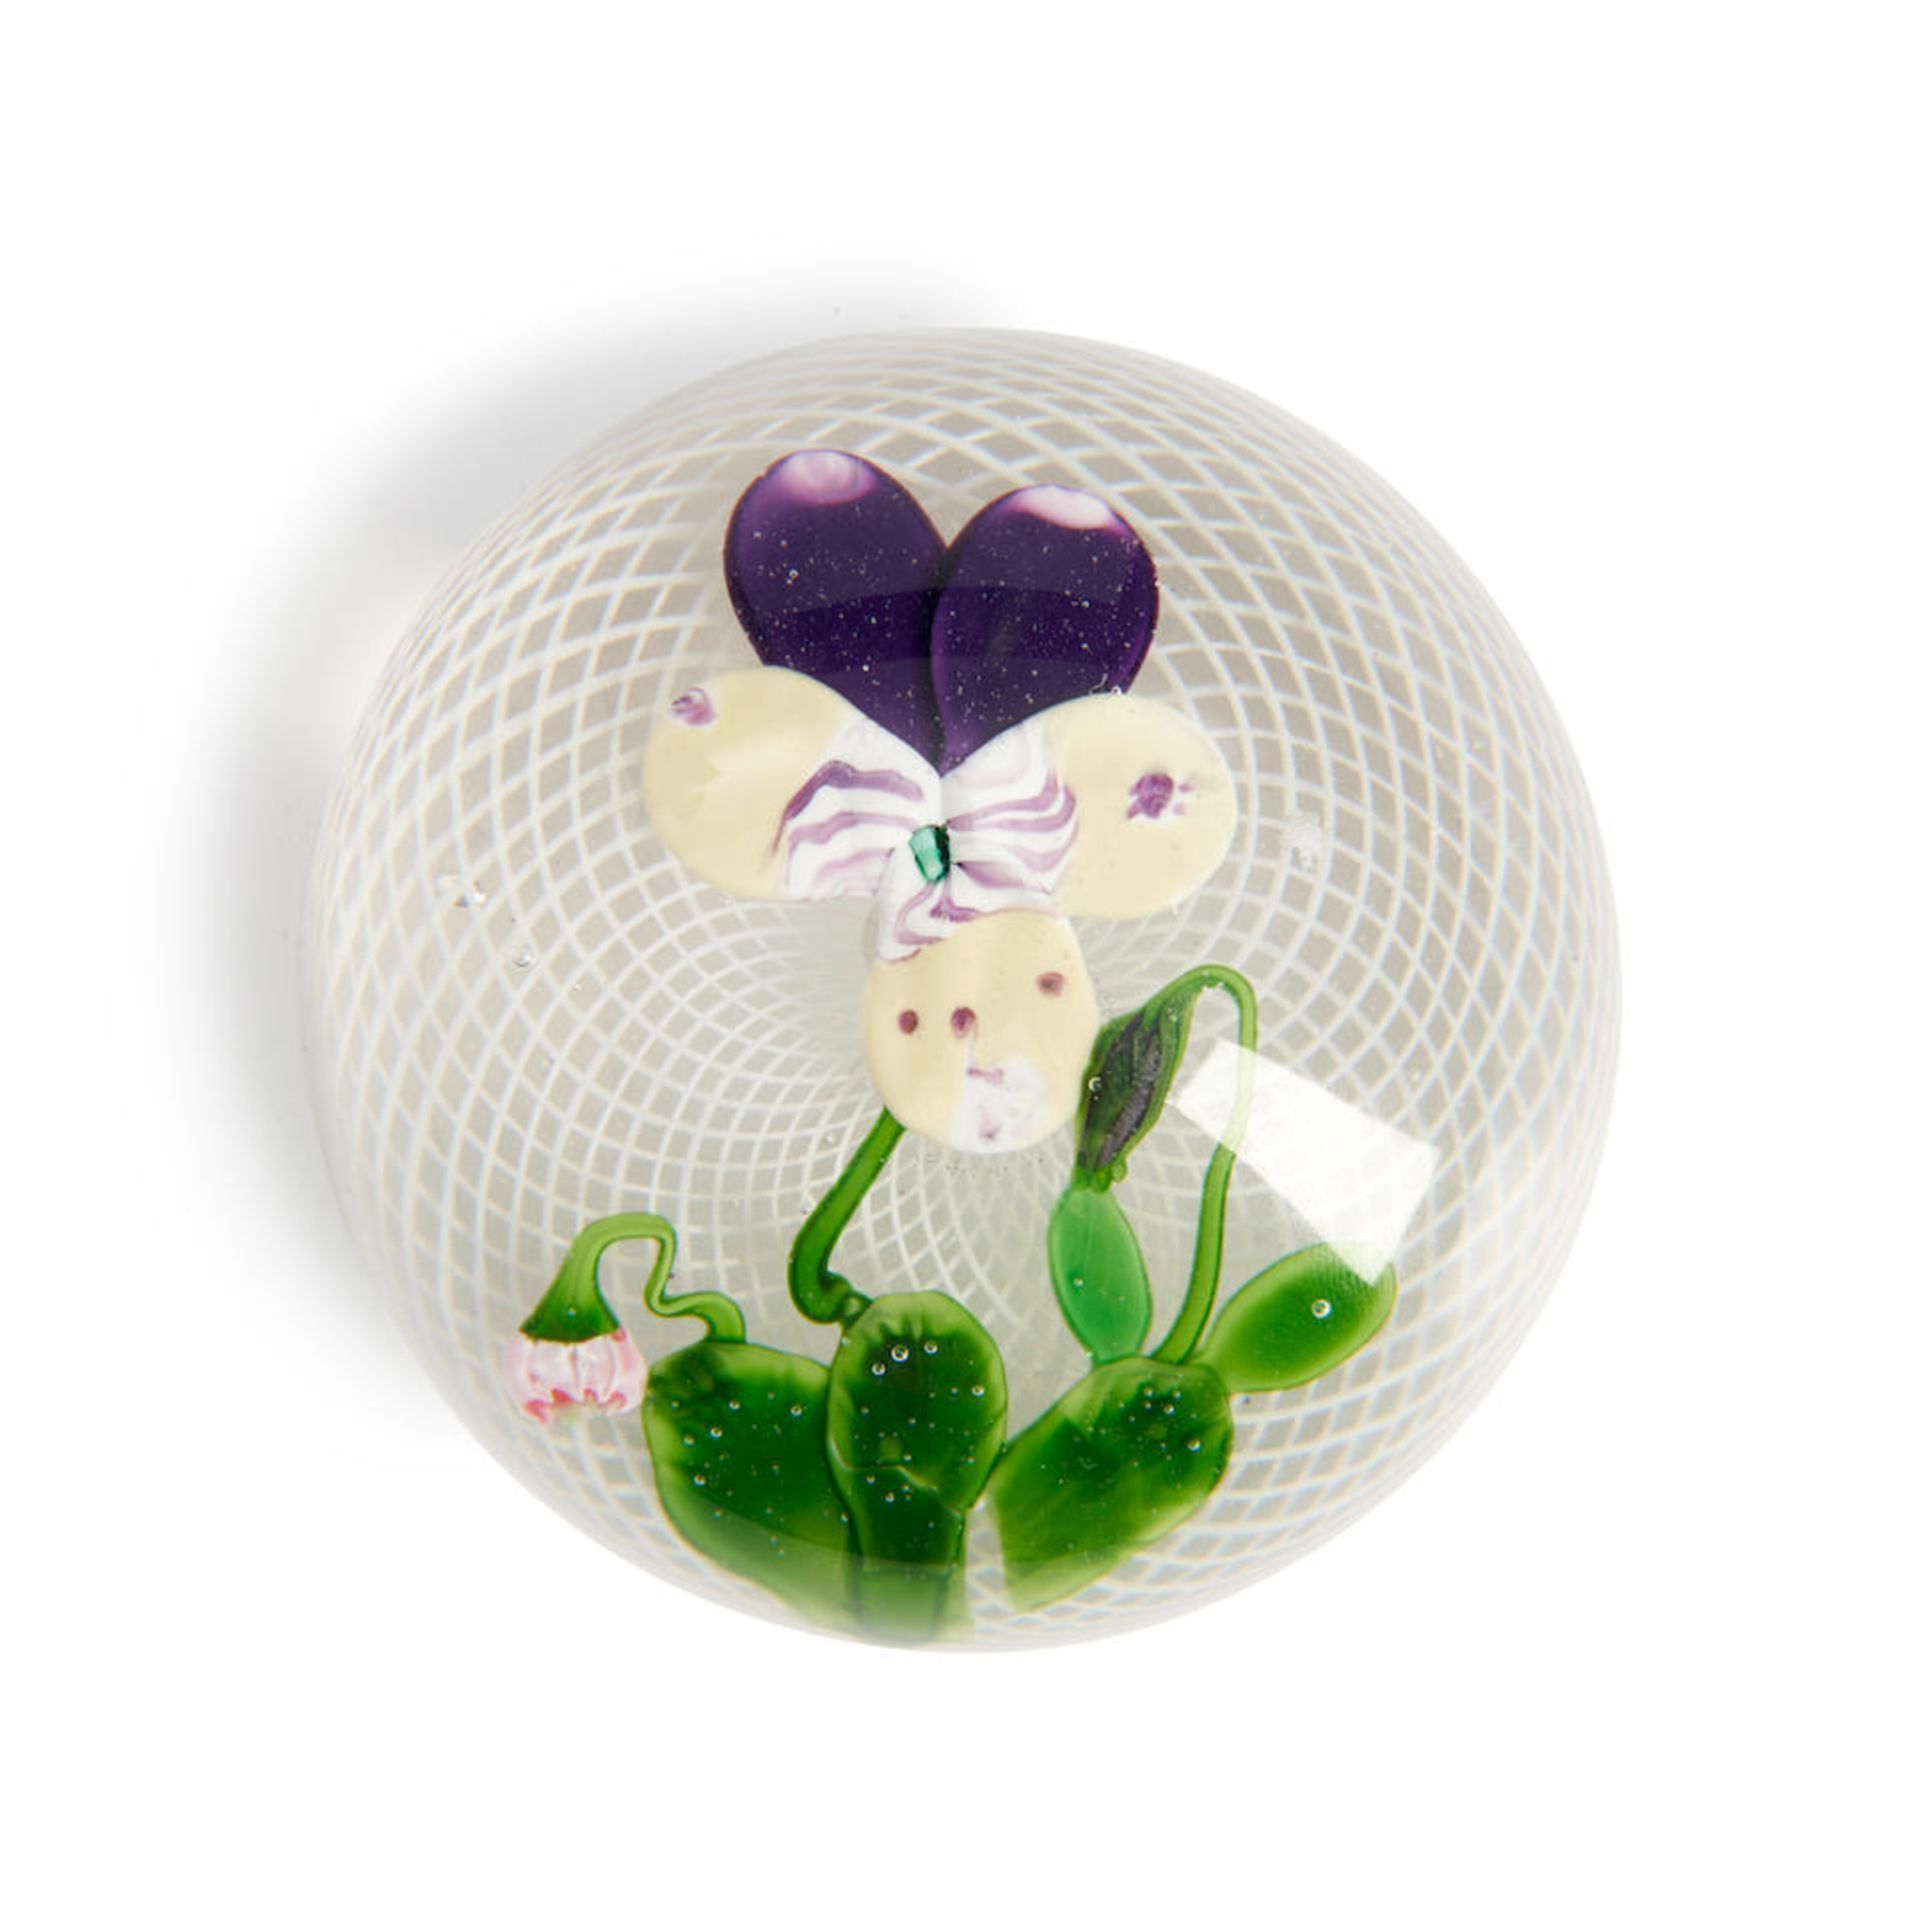 CLICHY BICOLOR PANSY GLASS PAPERWEIGHT, France, ht. 2, dia, 2 3/4 in.